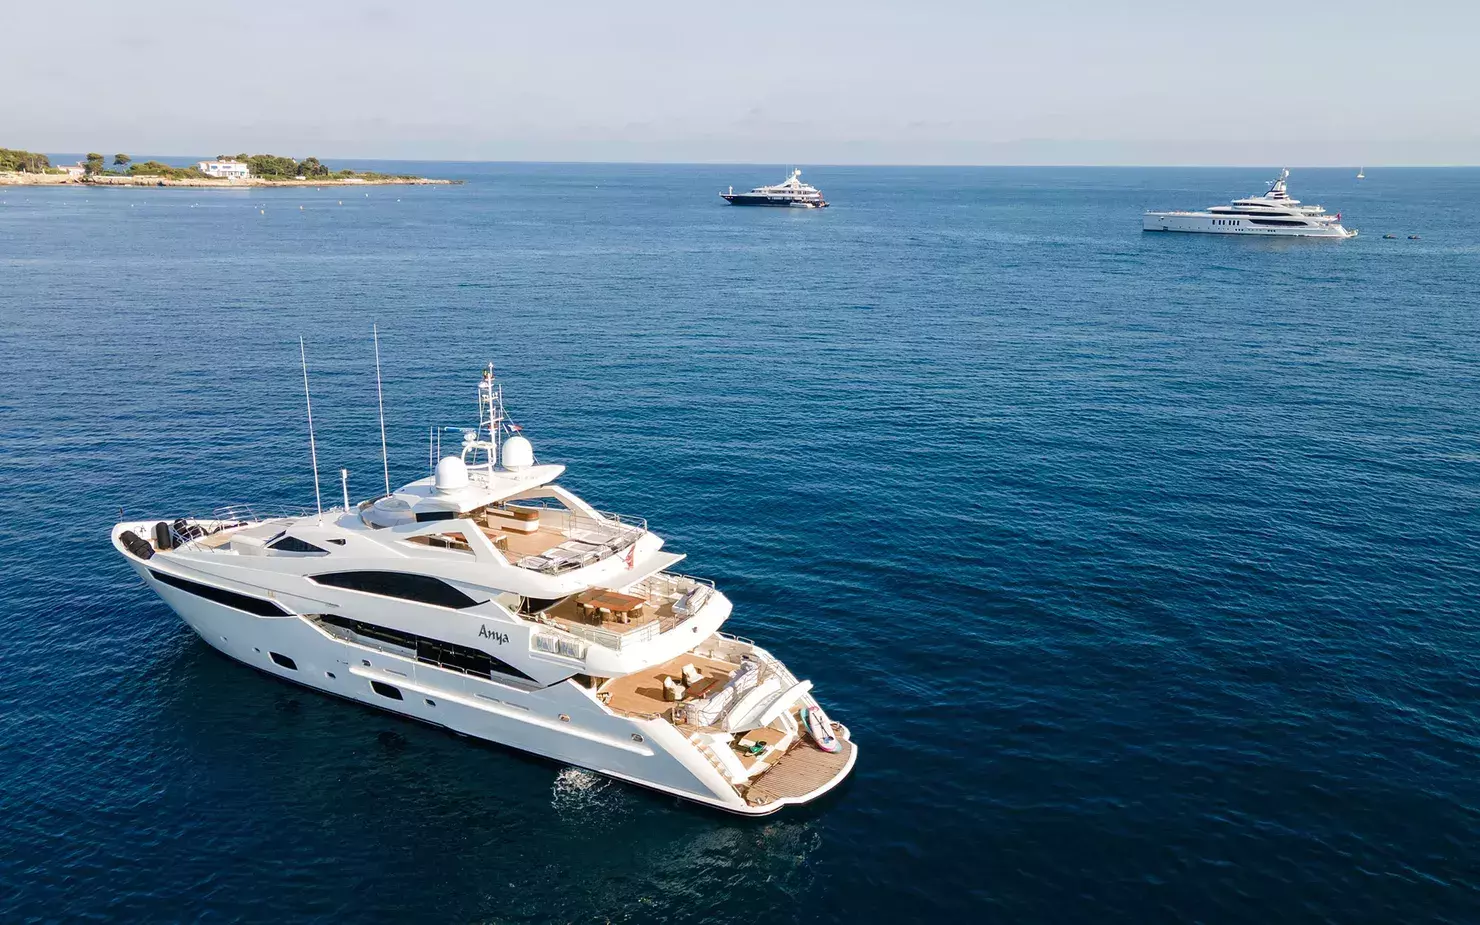 Anya by Sunseeker - Top rates for a Charter of a private Superyacht in Monaco